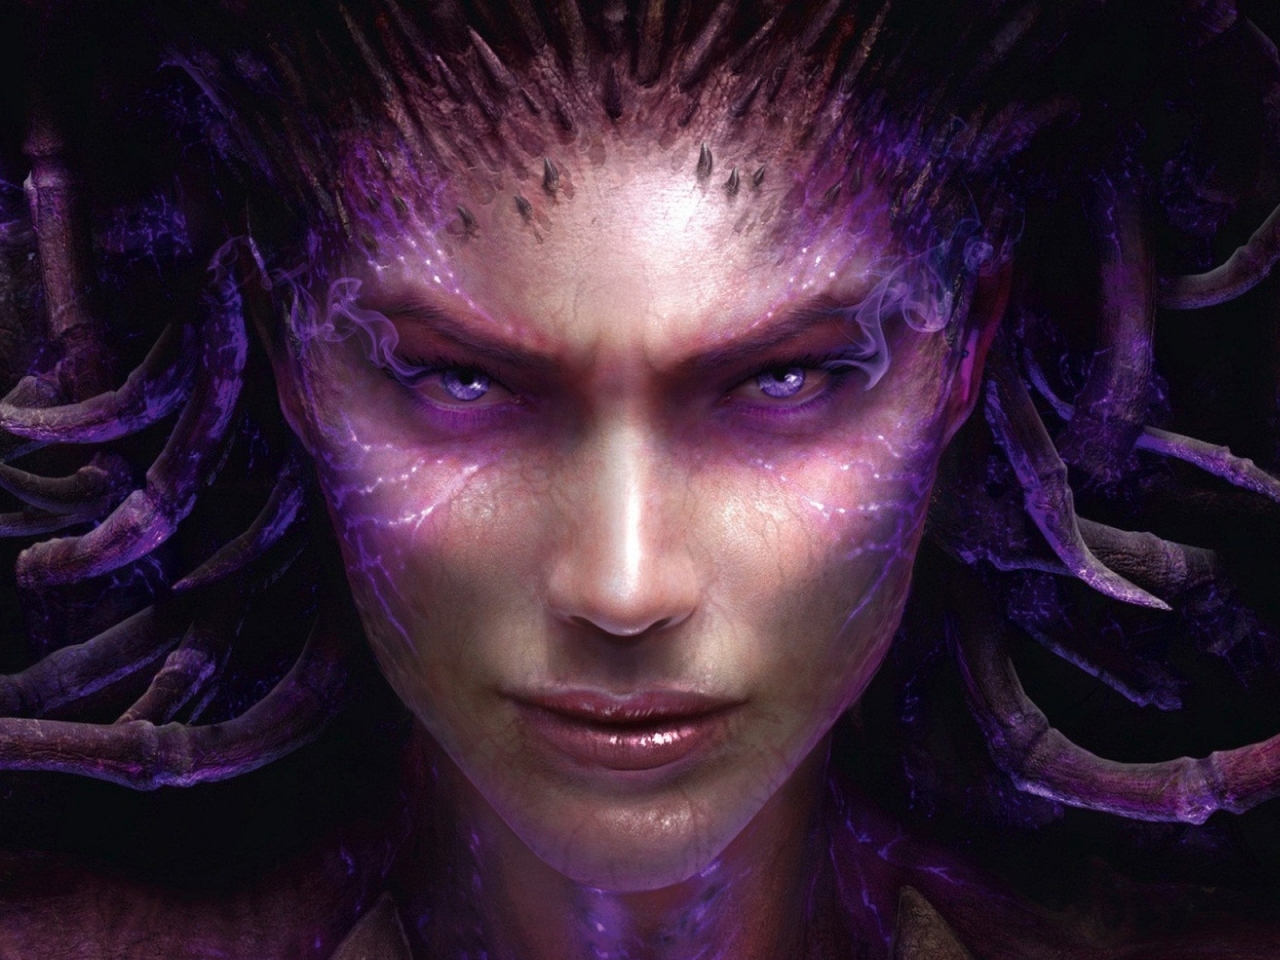 Starcraft 2 Heart of the Swarm for 1280 x 960 resolution